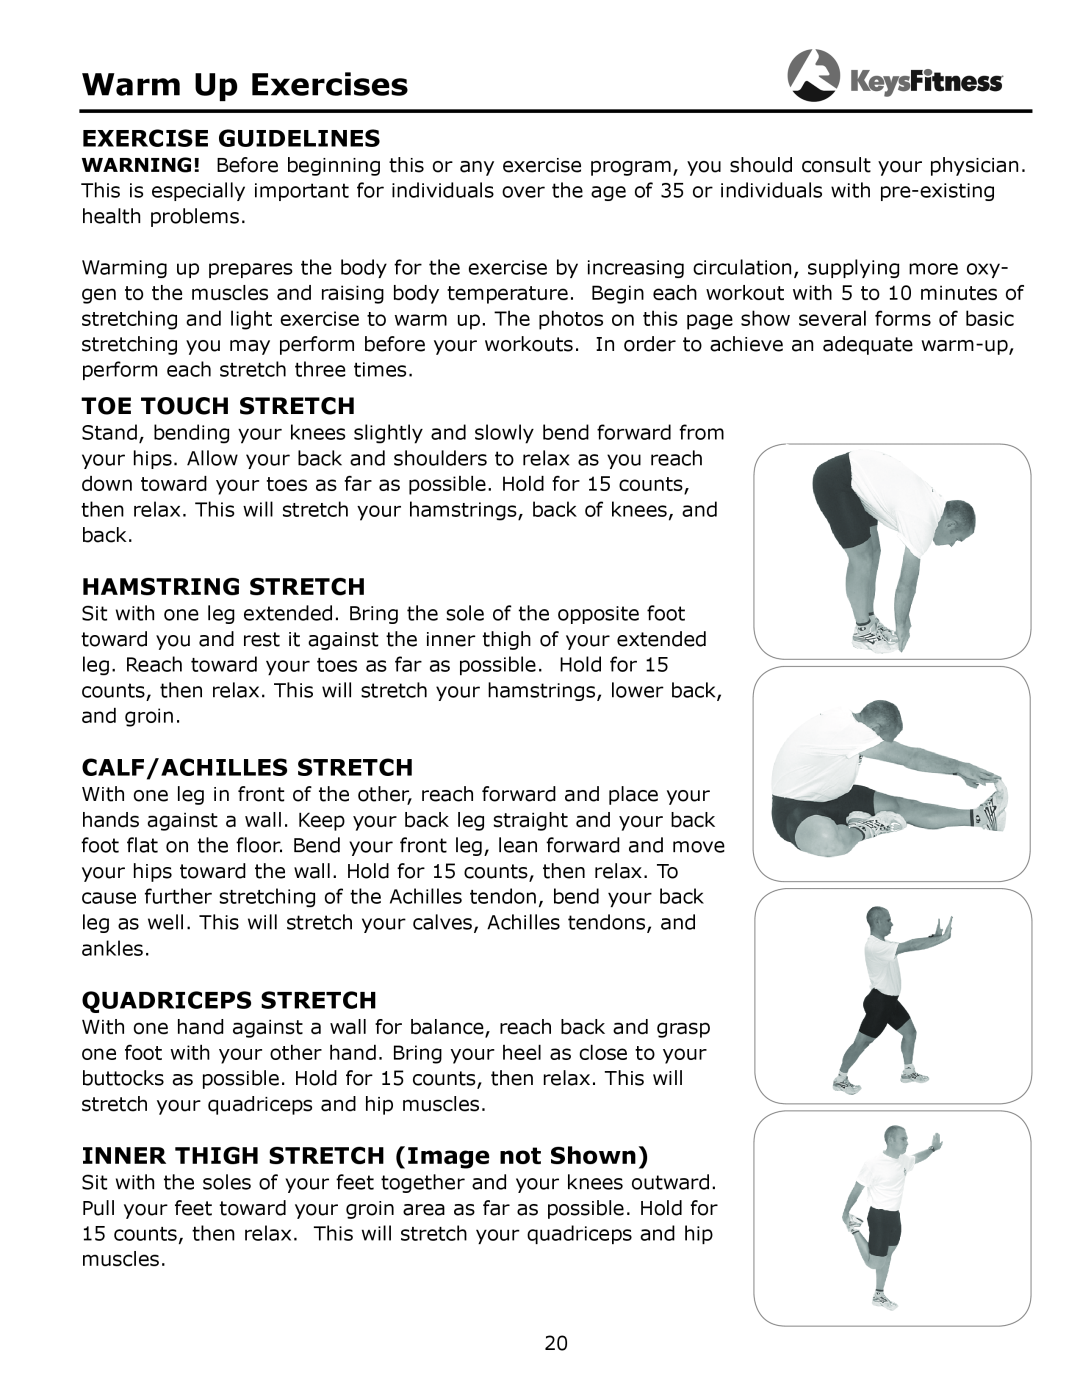 Keys Fitness 315-00106 Warm Up Exercises, Exercise Guidelines, Toe Touch Stretch, Hamstring Stretch, Calf/Achilles Stretch 